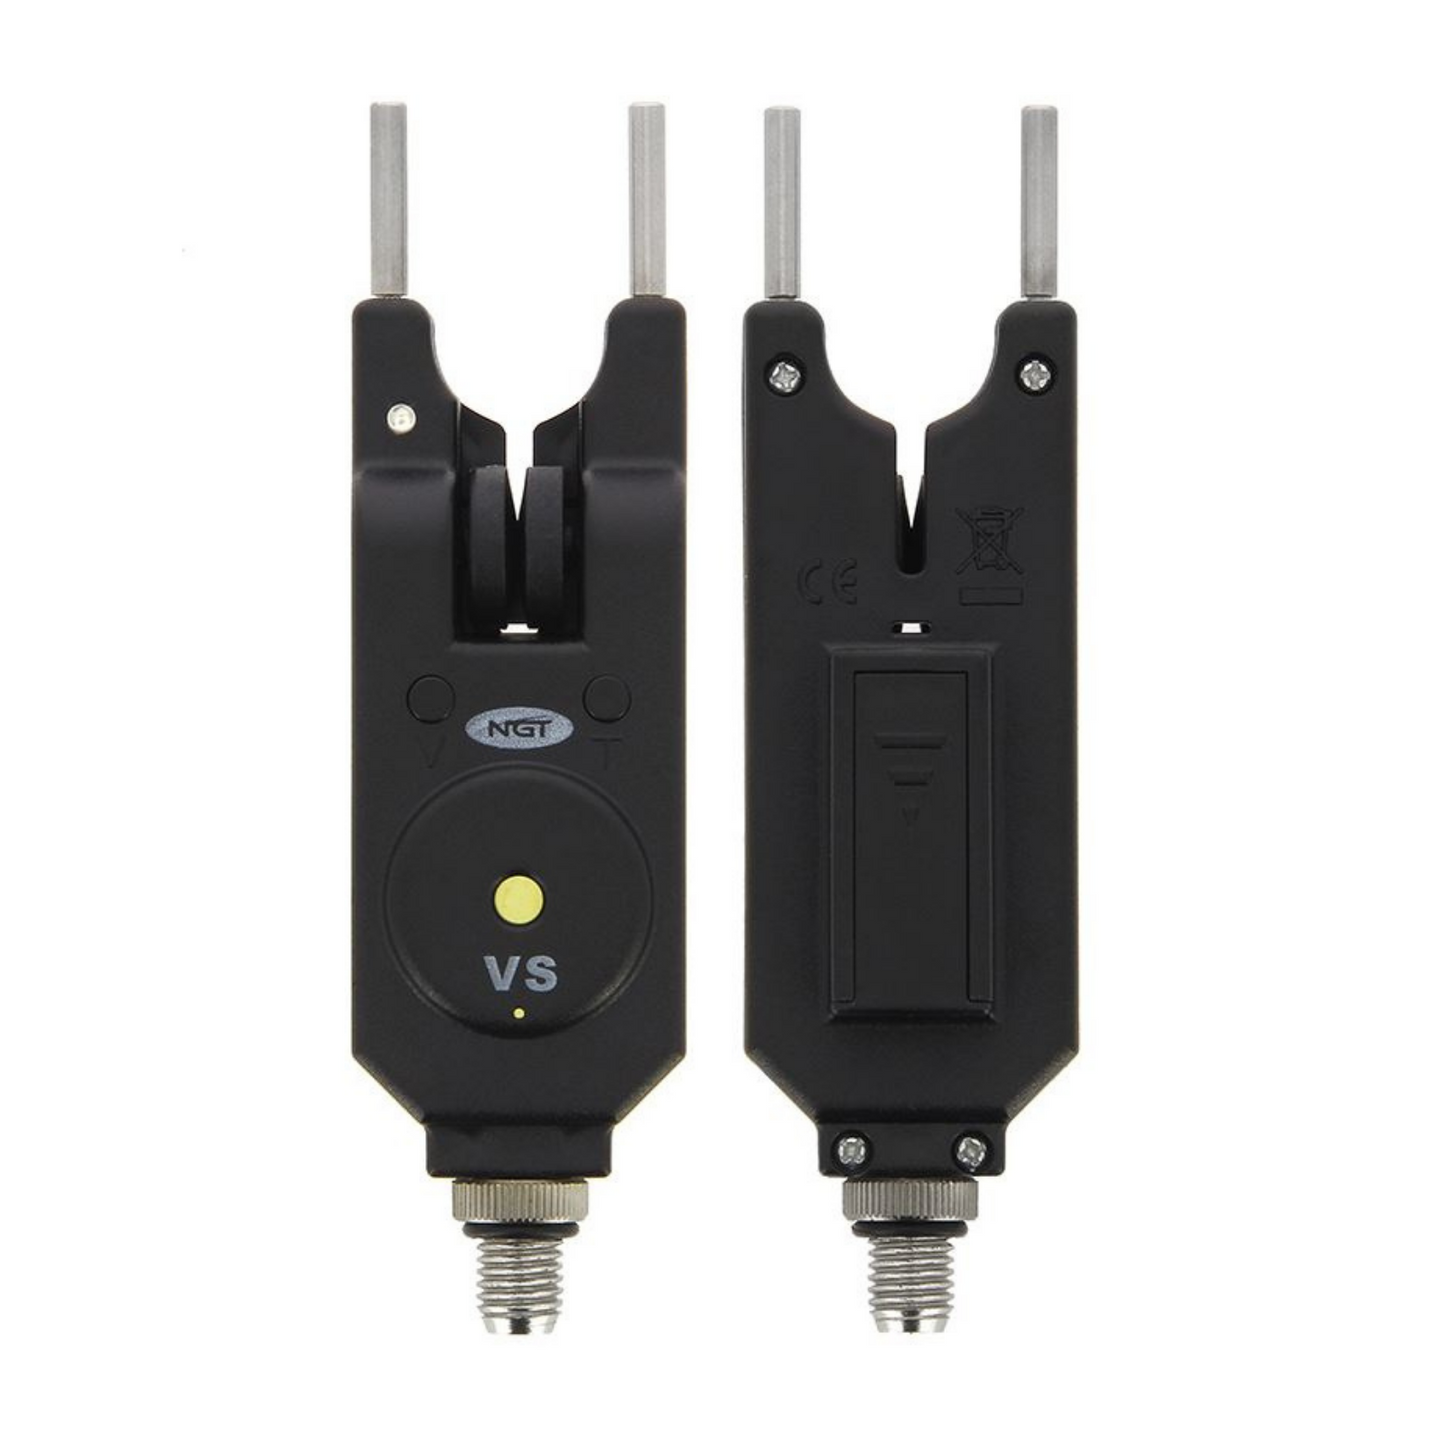 NGT Wireless Twin VS Bite Alarms Adjustable Tone & Volume With Receiver Set New In Stock.